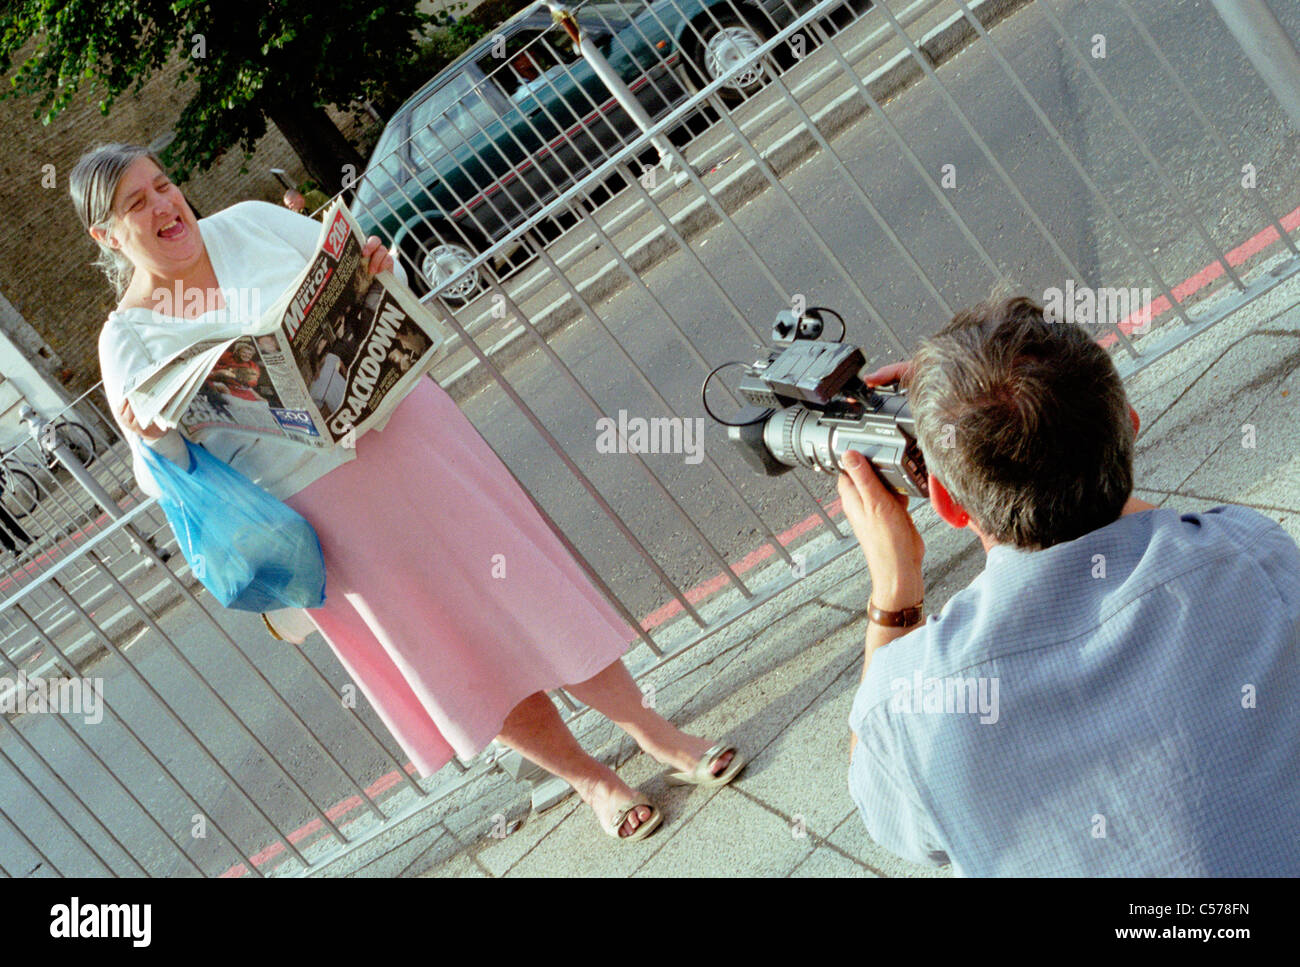 Martin Parr filming a woman during the making of 'London' music video for the Pet Shop Boys. Stock Photo